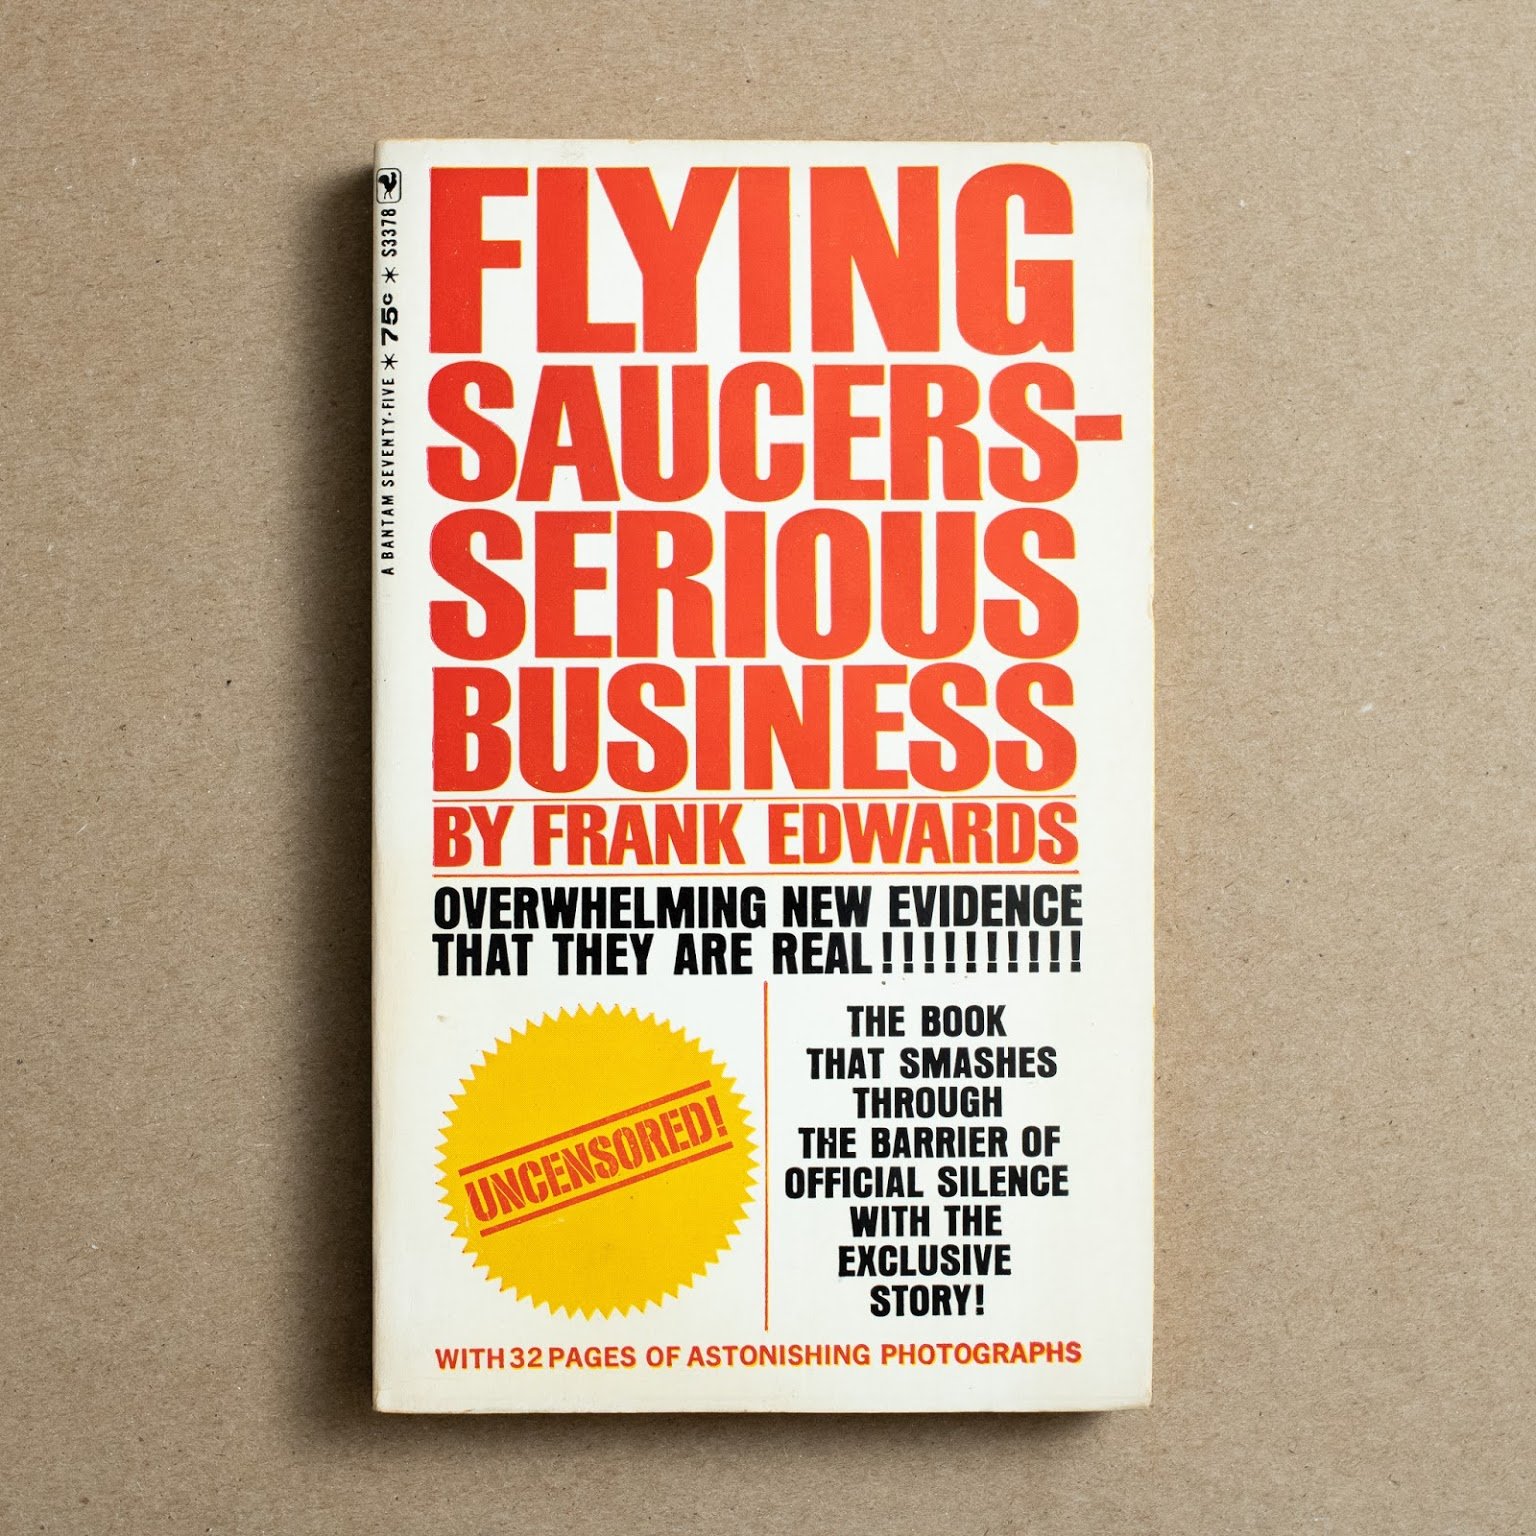 Flying Saucers—Serious Business